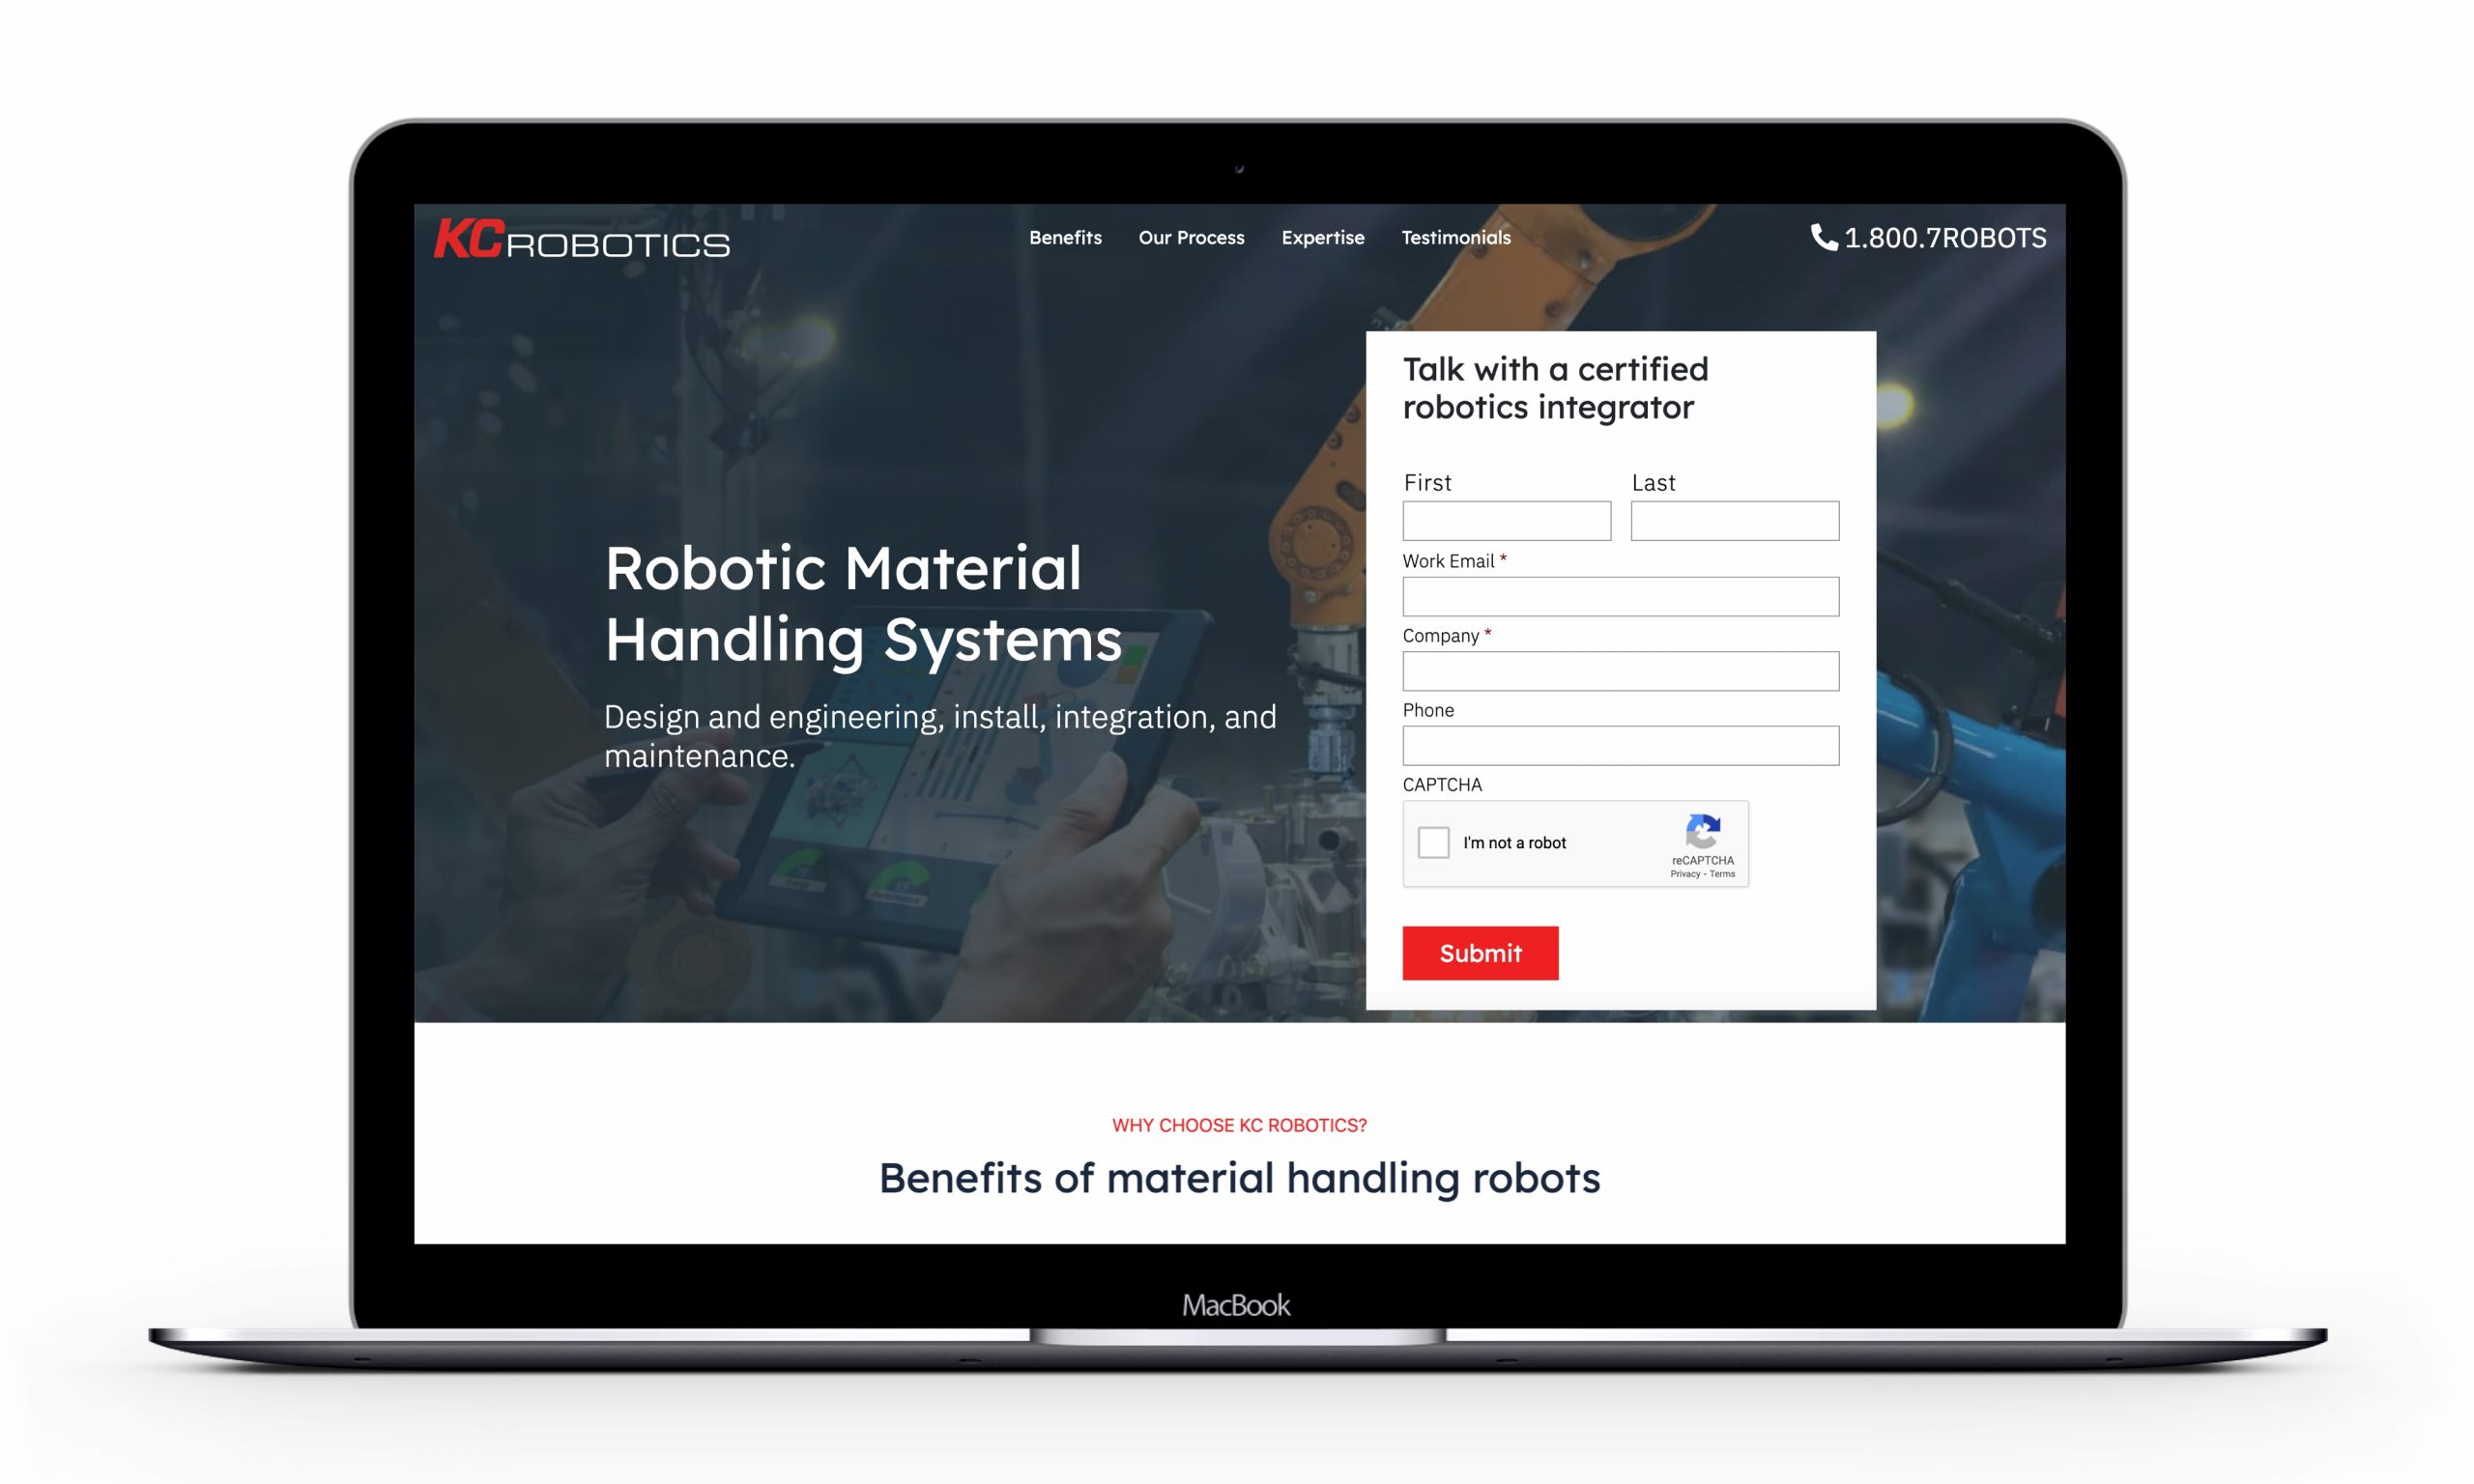 A large, engaging hero image highlighting KC Robotics' services on their landing page.